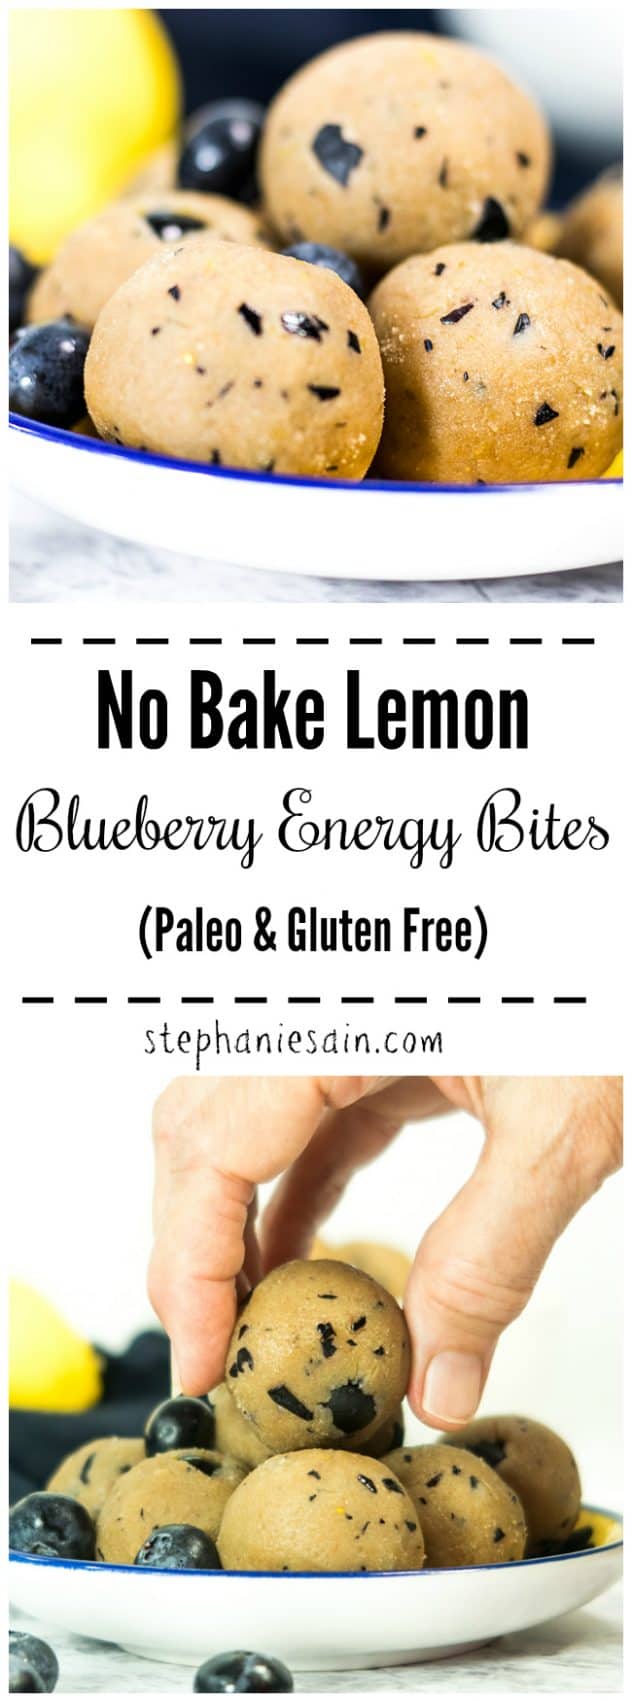 These No Bake Lemon Blueberry Energy Bites are perfect for an easy breakfast, grab & go snack, or post workout fuel. Only 6 ingredients & 10 minutes prep. Healthy, delicious, & kid friendly. No added refined sugars, Vegan, Paleo, & Gluten Free.